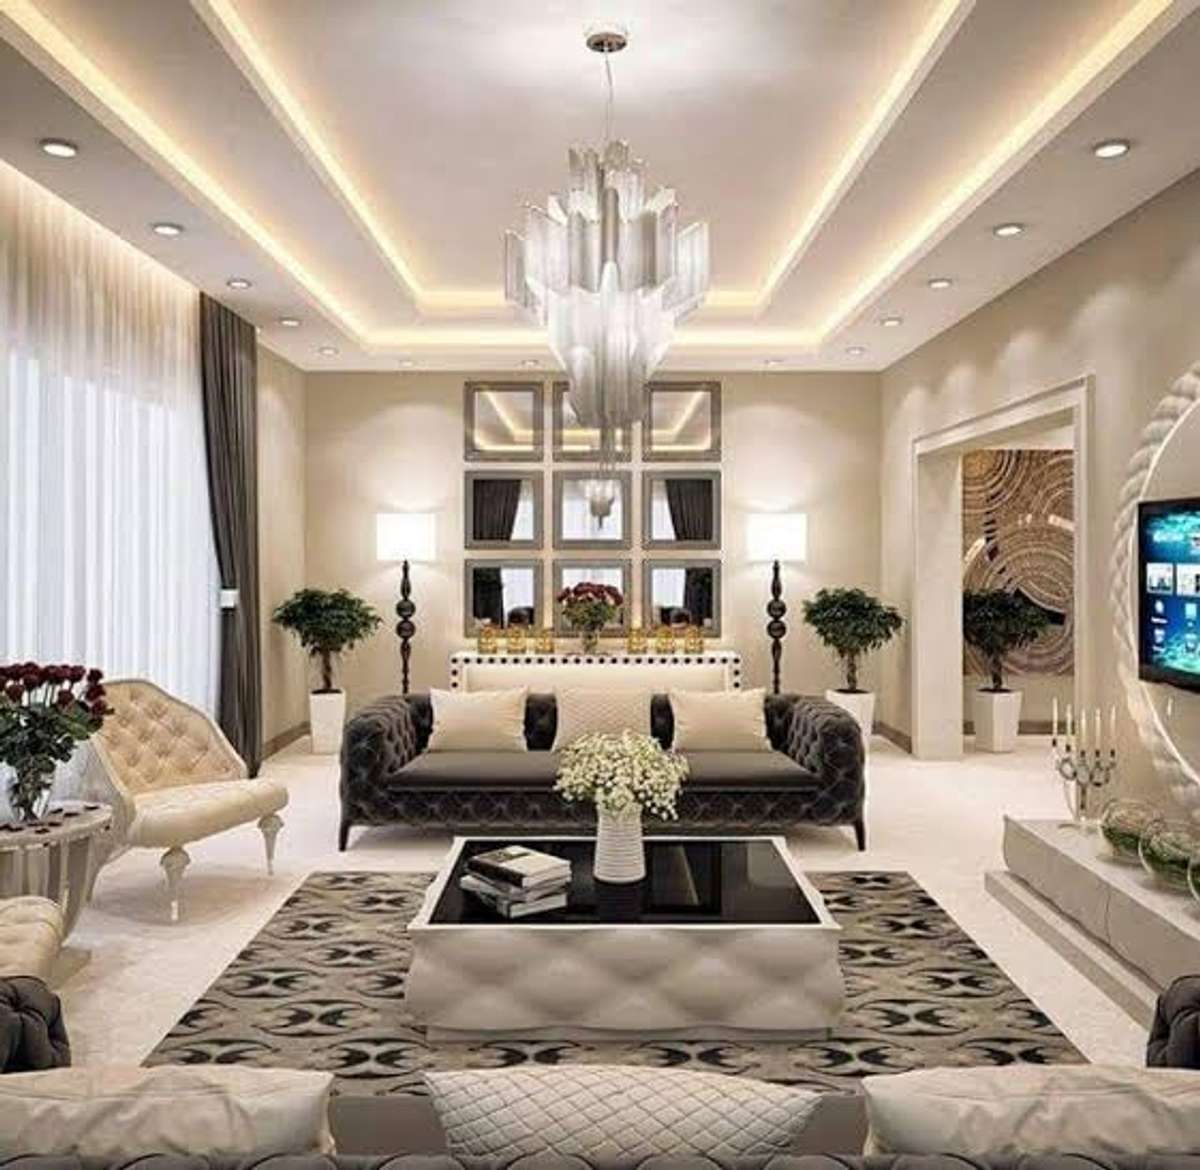 *INTERIOR Design and Decor Consultancy*
Get Your Home a Perfect look as per your choice, Style, Budget and Quality implementation with our expert supervision.